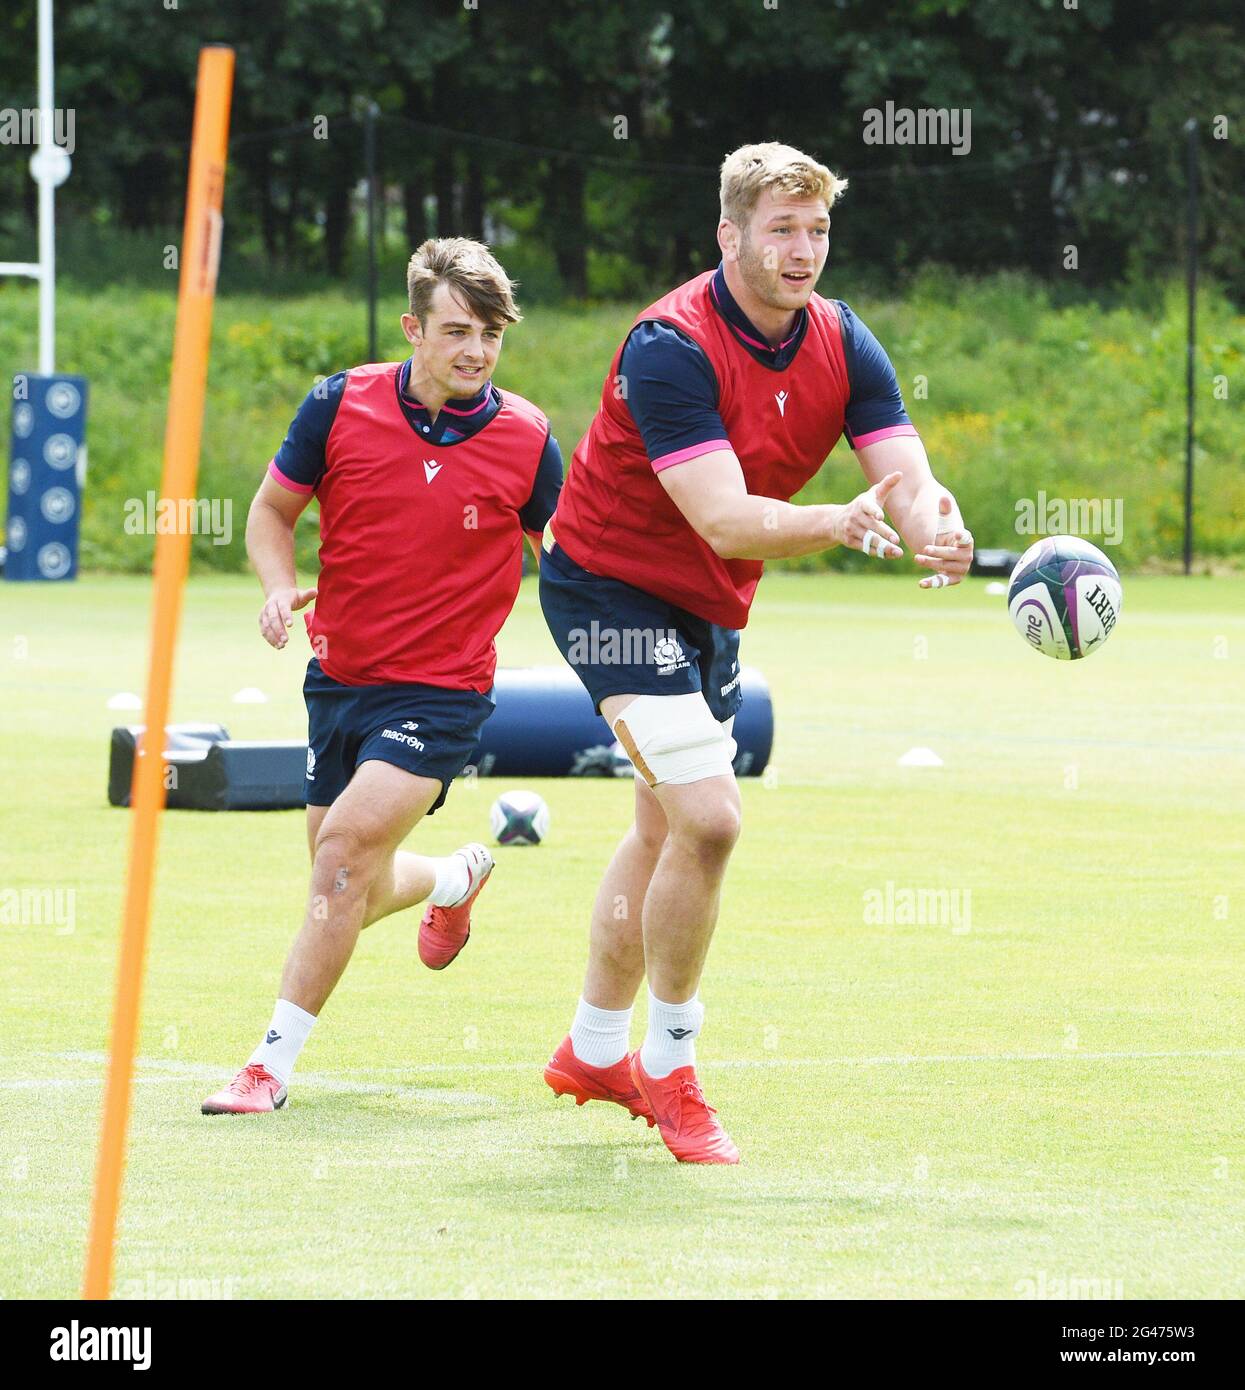 Oriam Sports Performance Centre, Riccarton, Edinburgh, Scotland. UK .18th June 21.Scotland Rugby squad Jamie Hodgson with support from Ross Thompson during training session for the England A fixture . Credit: eric mccowat/Alamy Live News Stock Photo